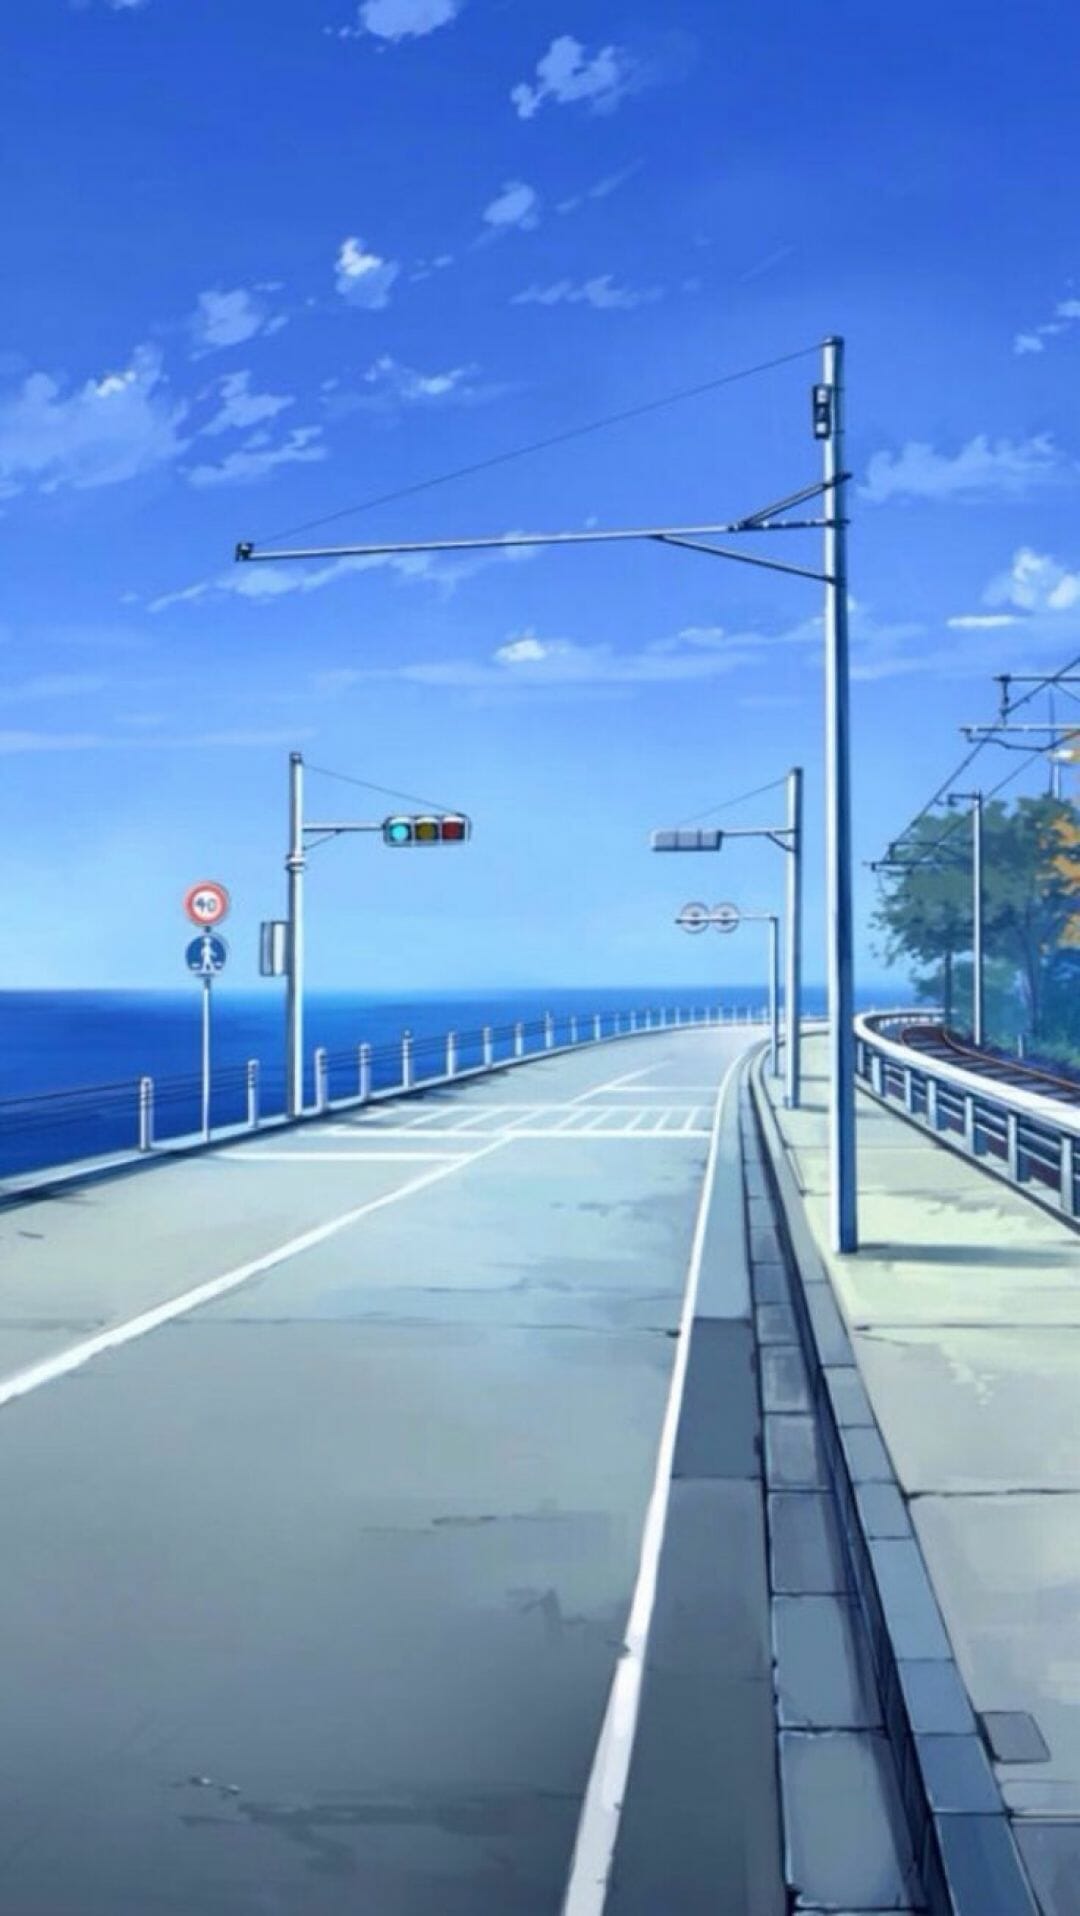 Anime phone wallpaper of a road with a traffic light - Anime, blue anime, 90s anime, anime landscape, road